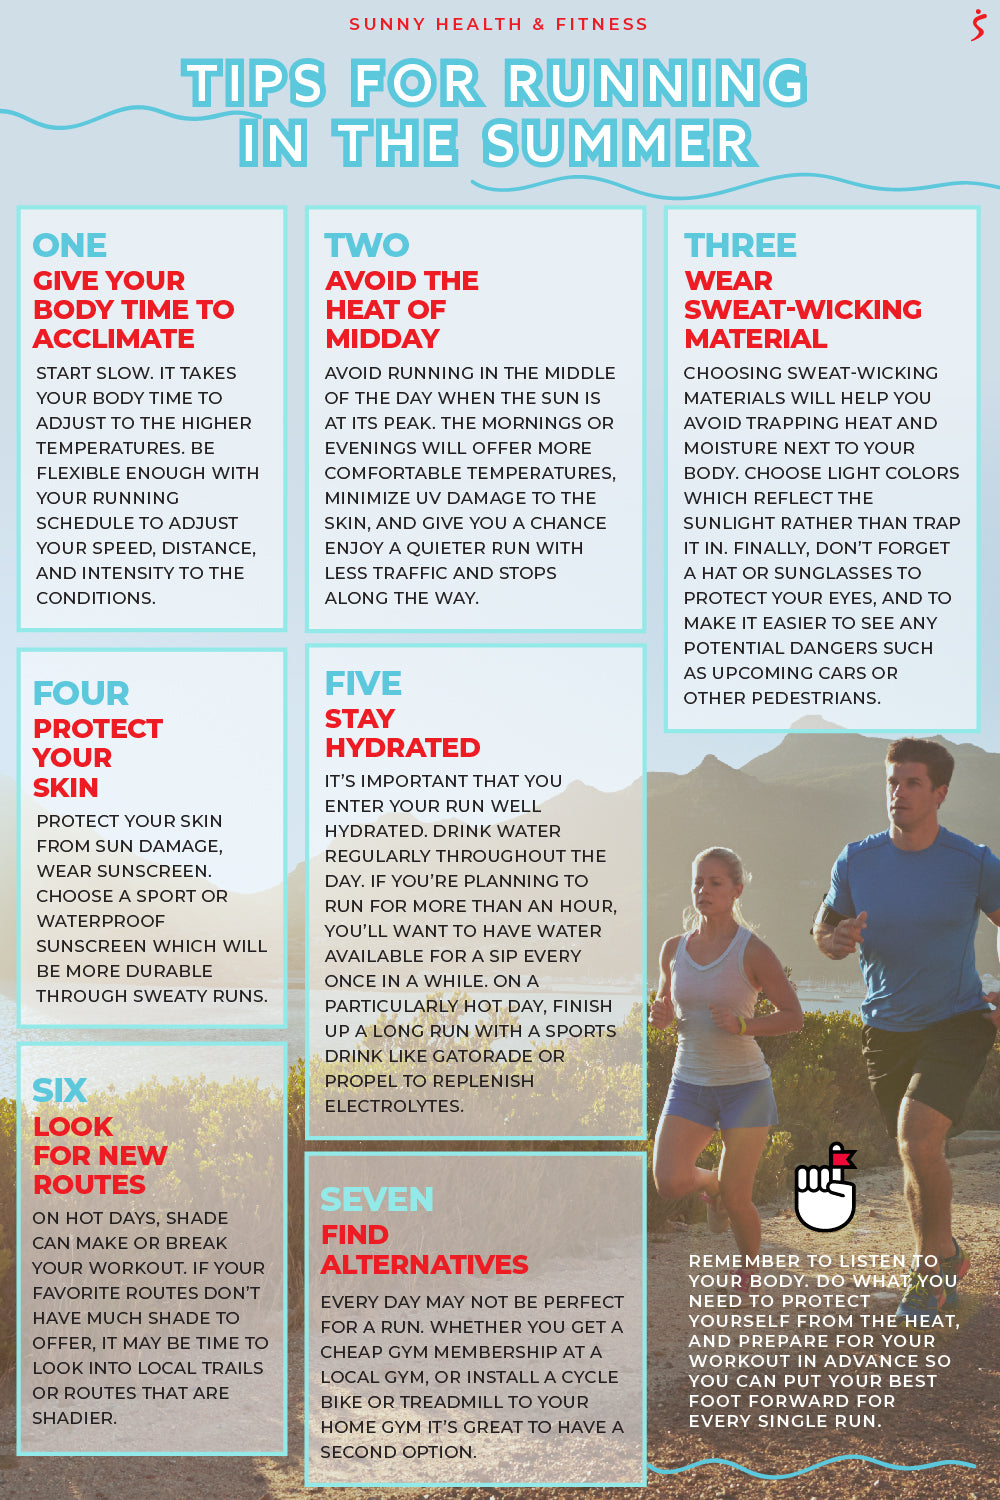 Tips for Running in the Summer